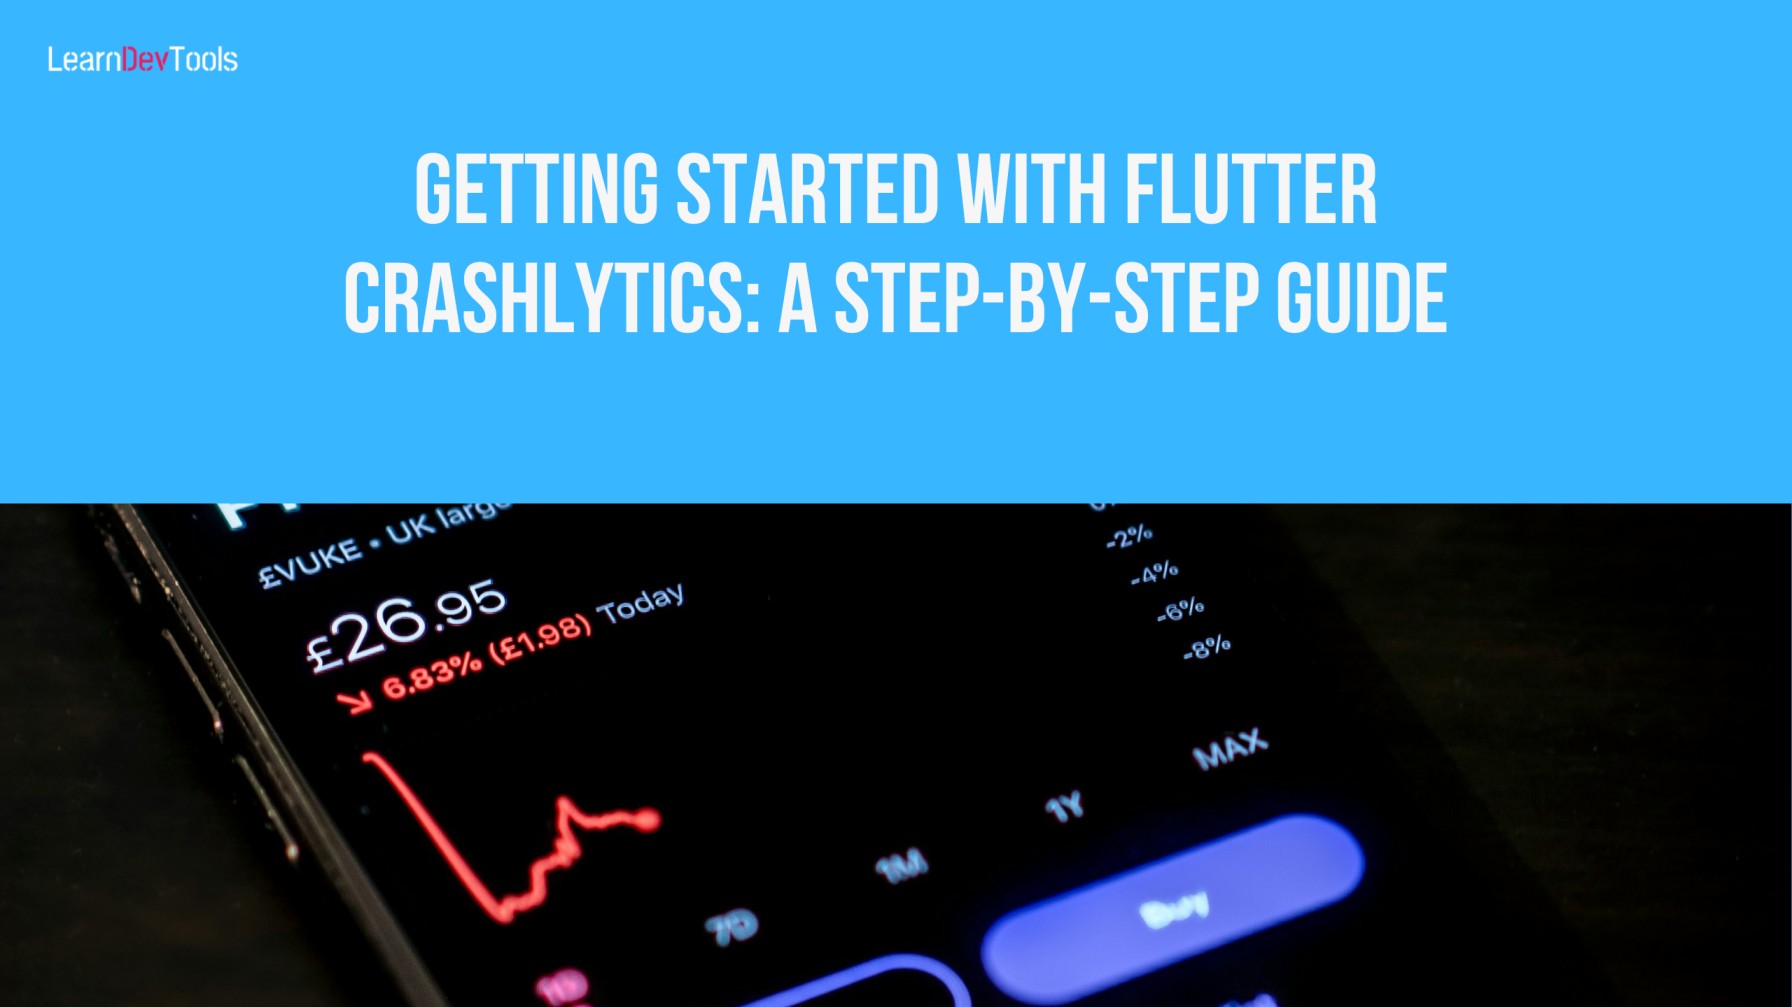 Getting Started with Flutter Crashlytics: A Step-by-Step Guide